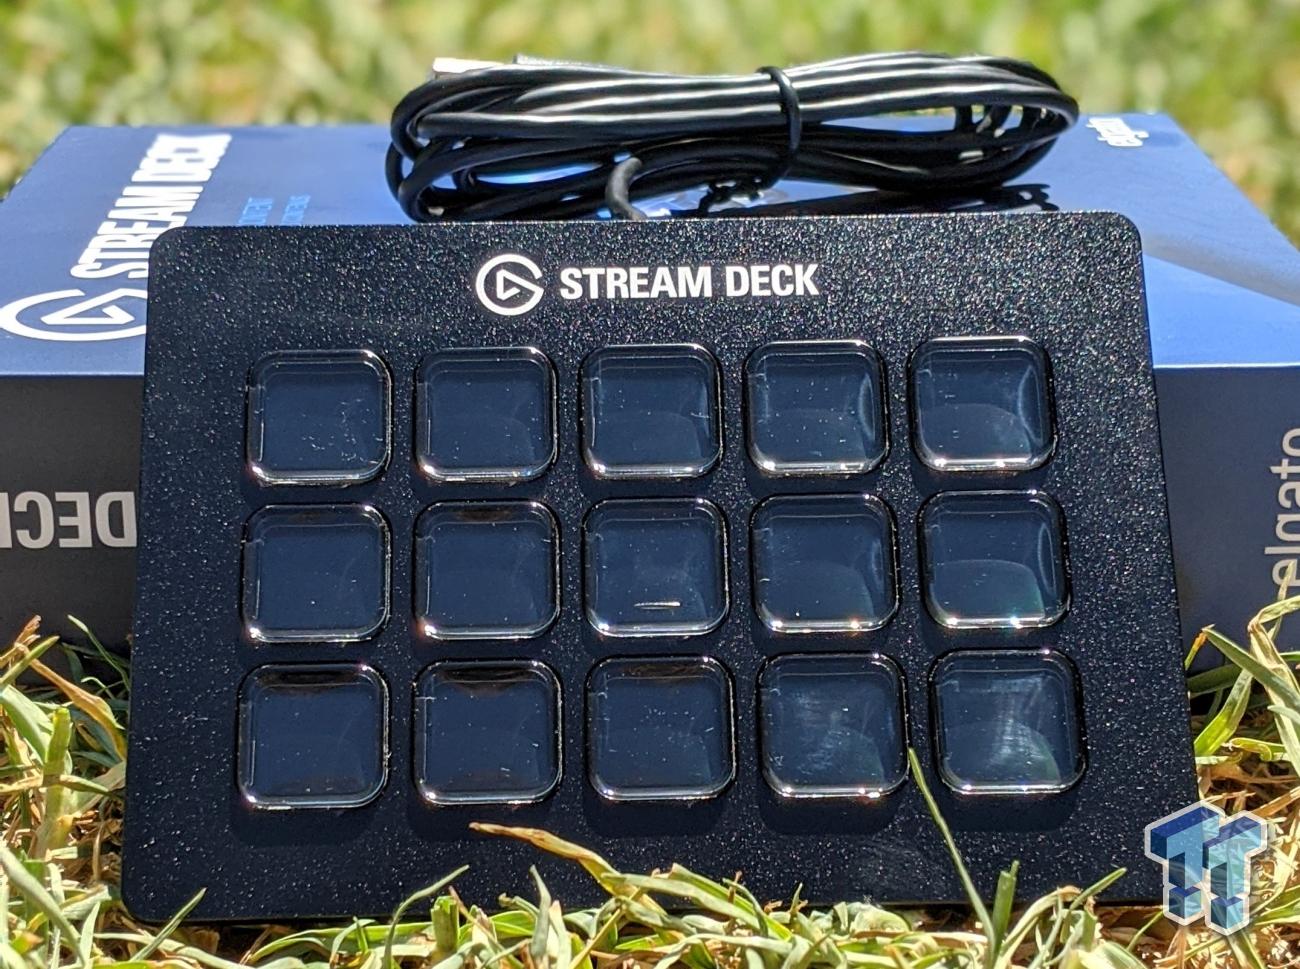 Elgato Stream Deck + review: A brilliant device that, in the right setup,  will open a lot of new doors